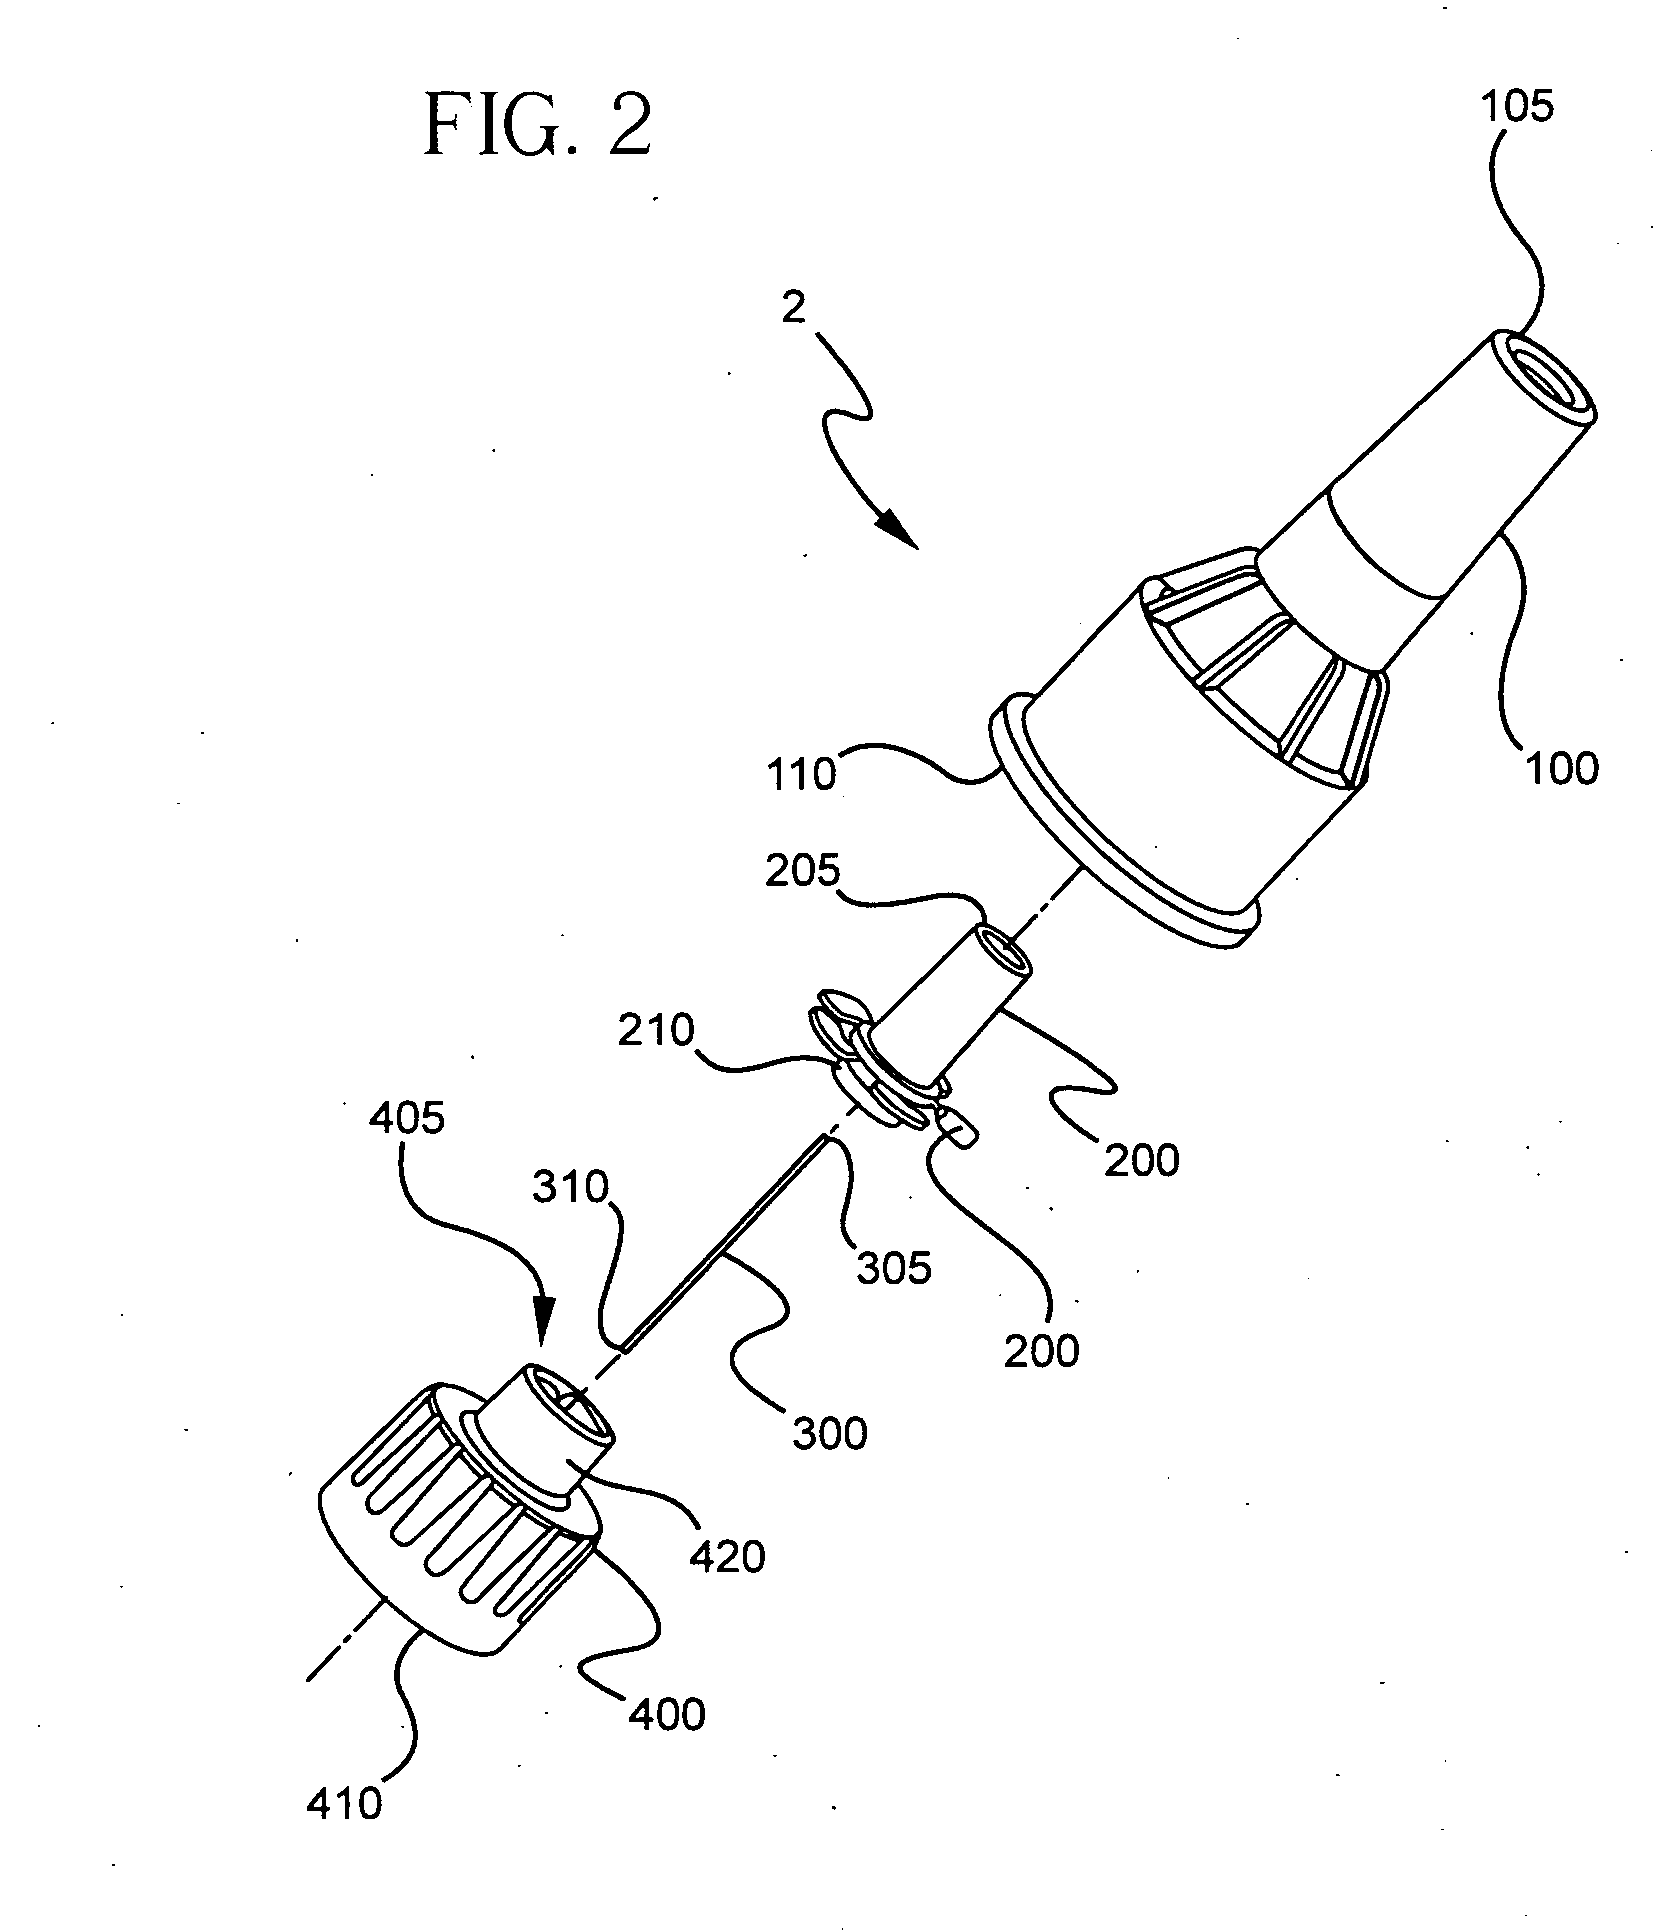 Disposable needle and hub assembly